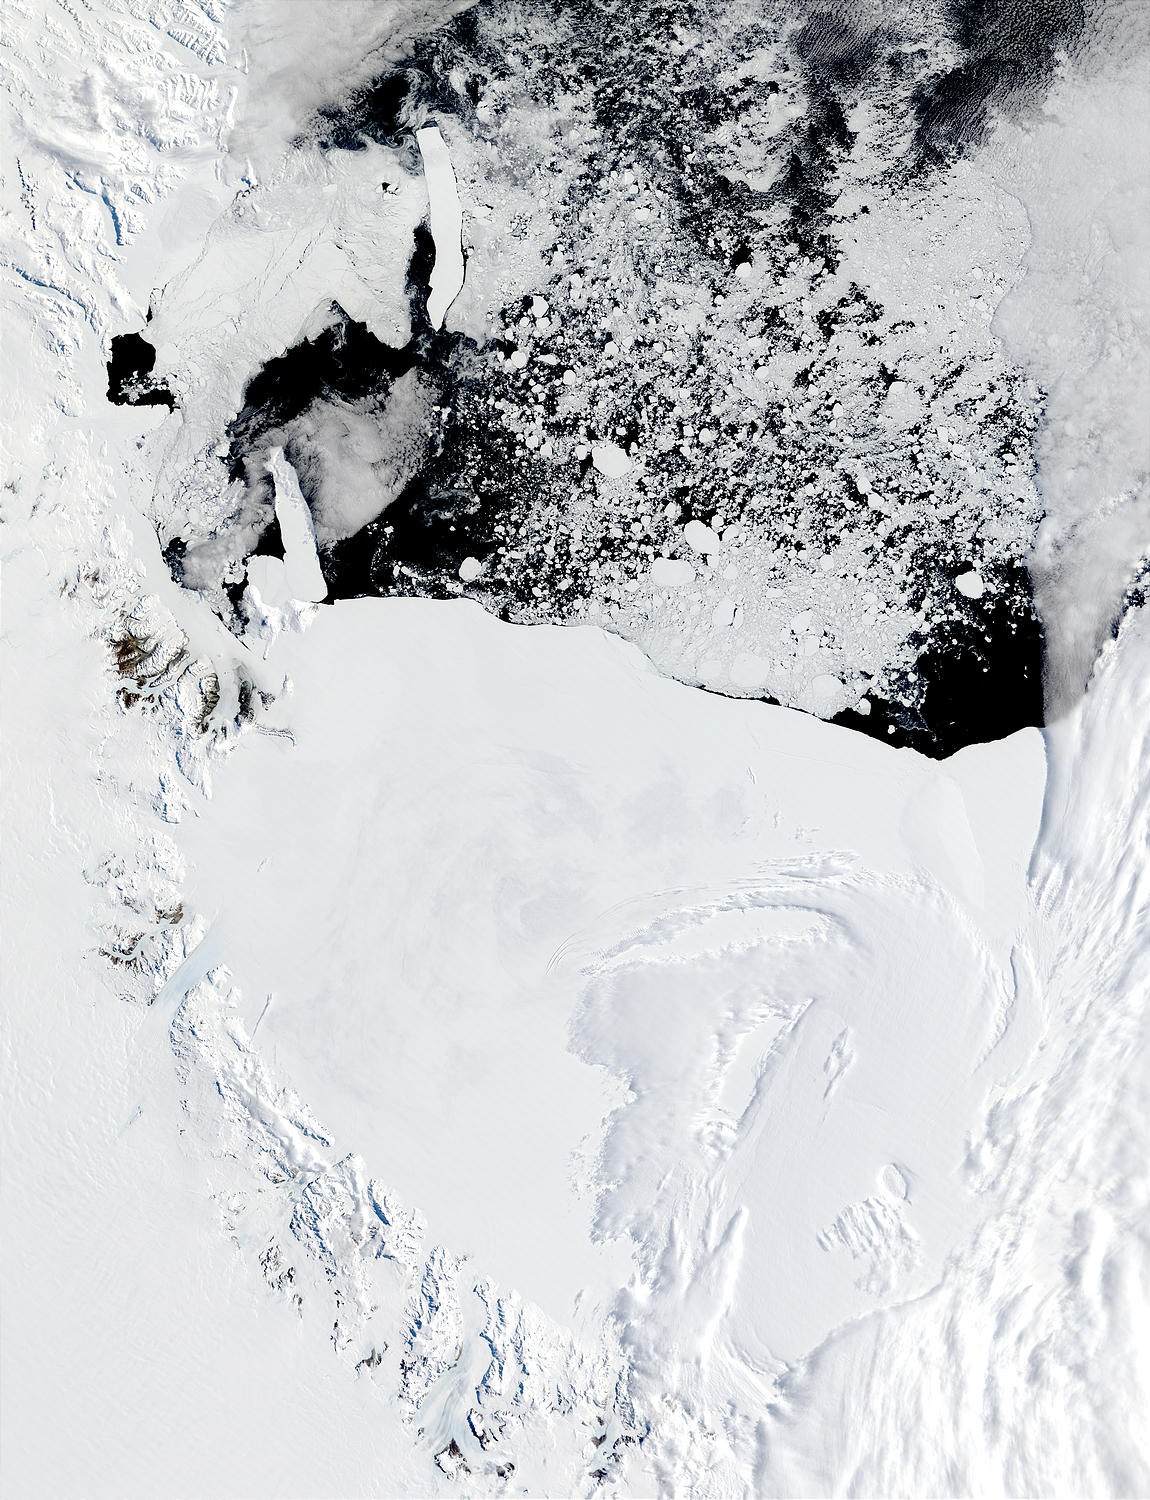 Ross Ice Shelf and Ross Sea, Antarctica - related image preview